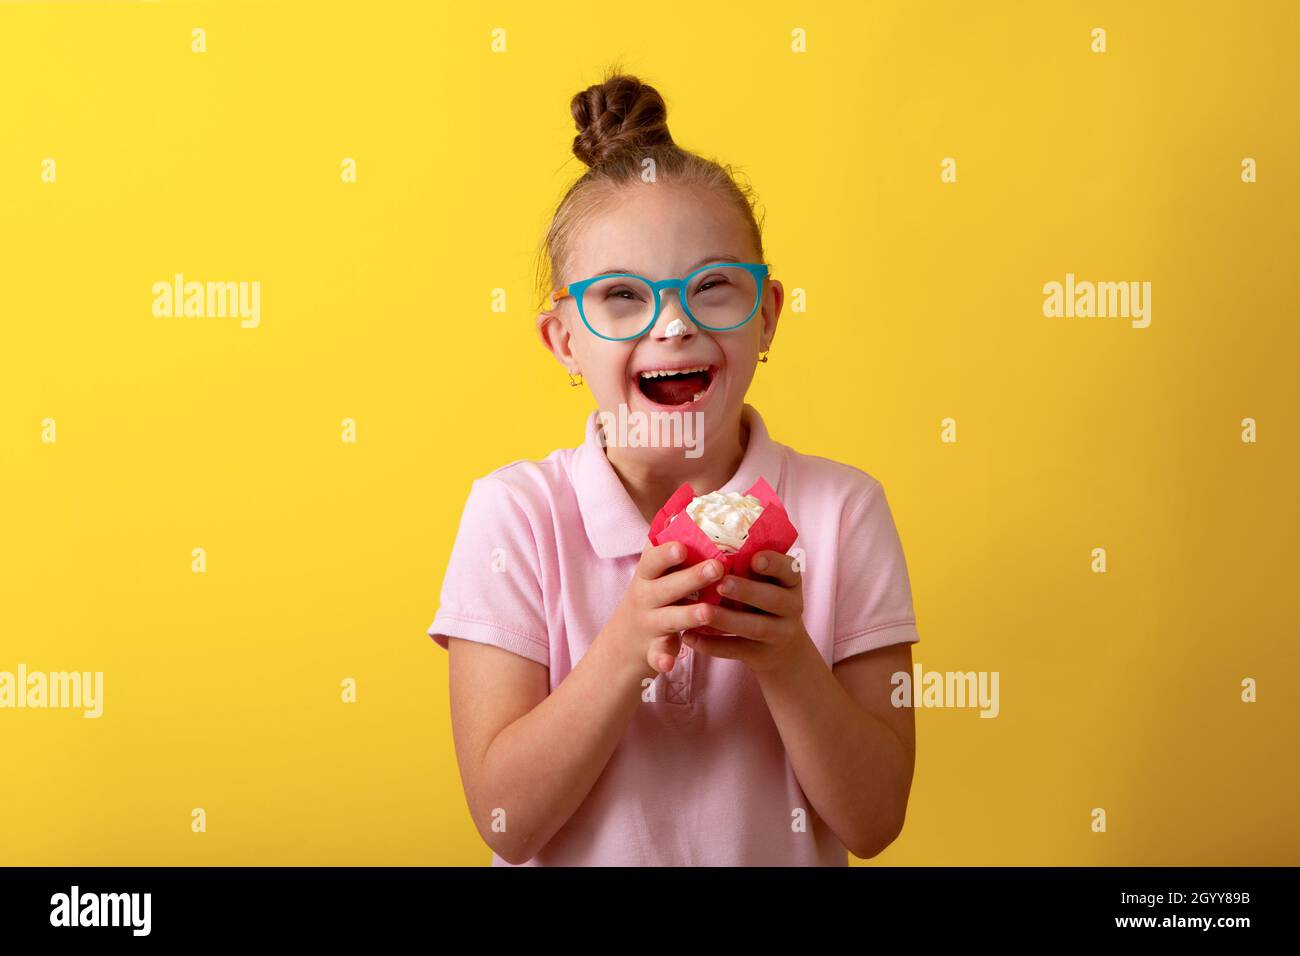 Happy girl with Down syndrome. Having fun, laughing. Funny pigtails. Studio. Portrait on a yellow background. Happy birthday Stock Photo